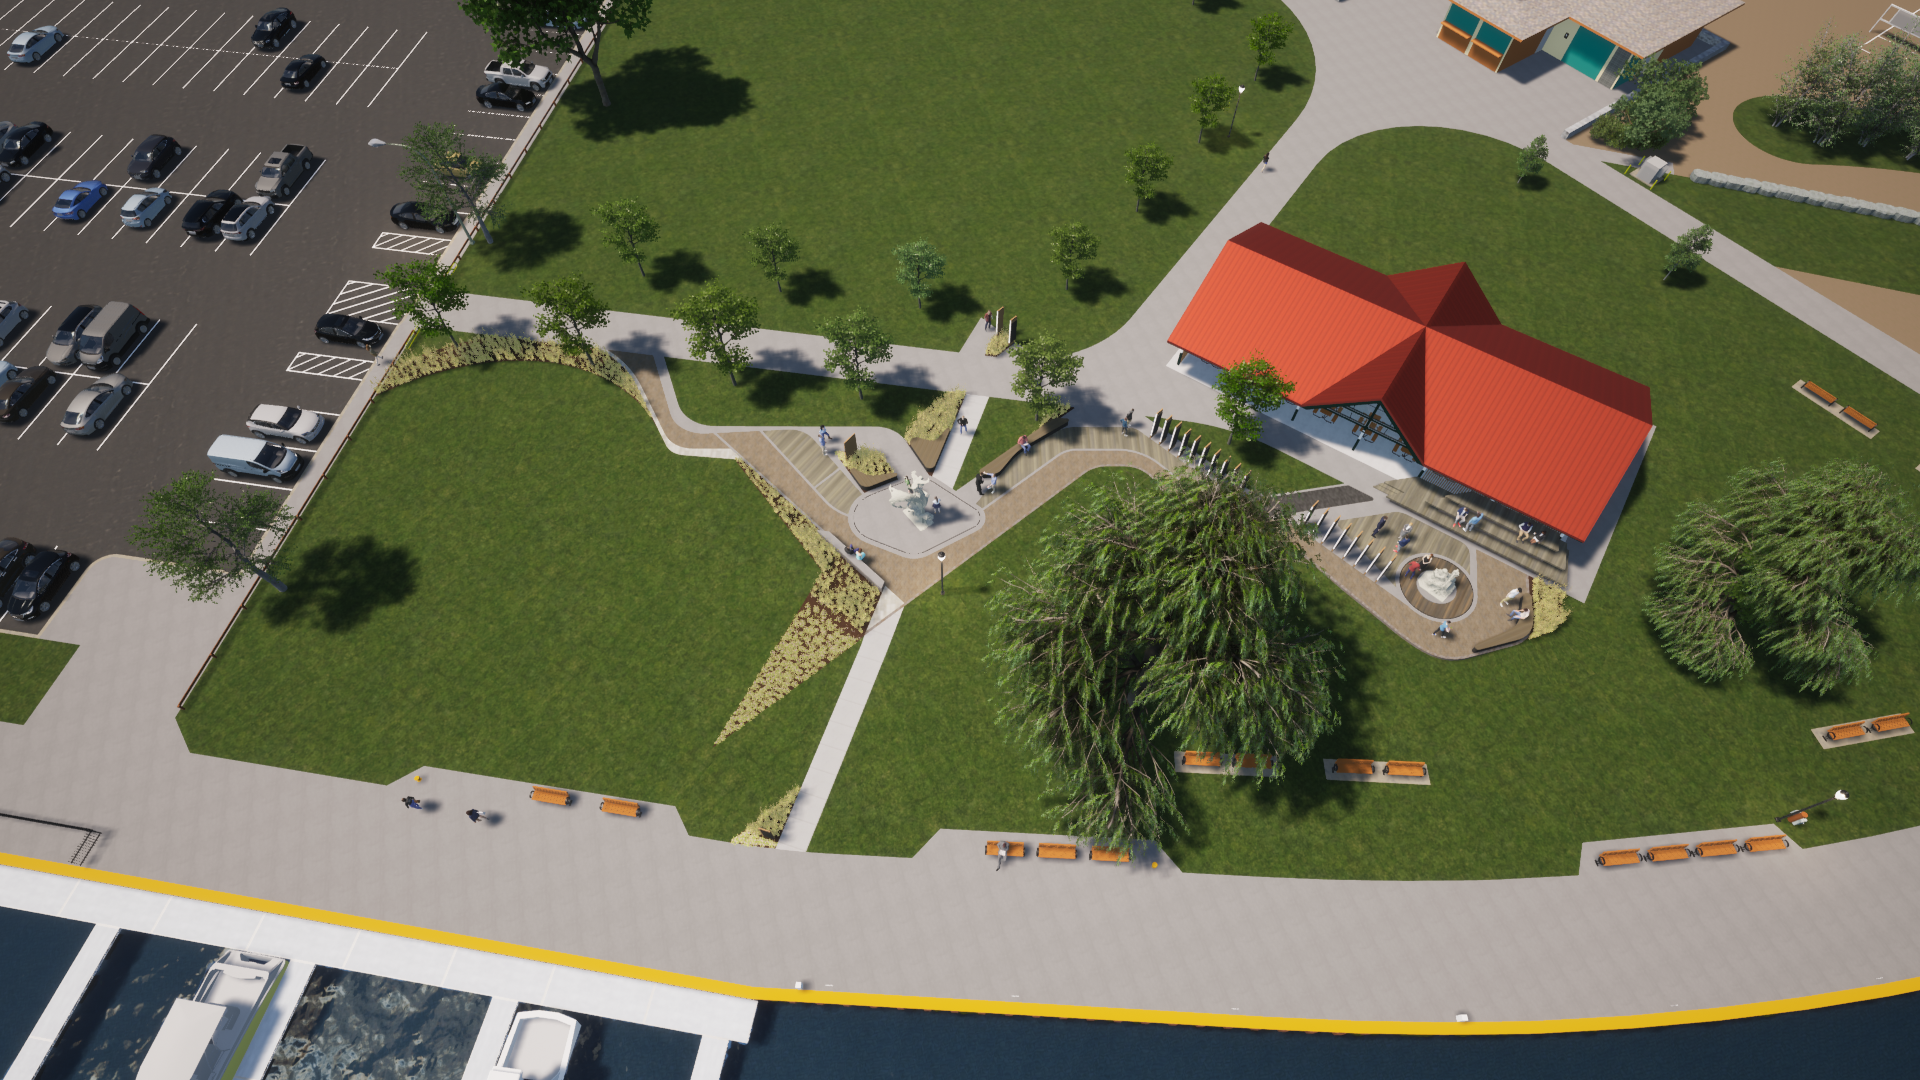 Artist rendition of the Neil Peart memorial, detailing paths and other features